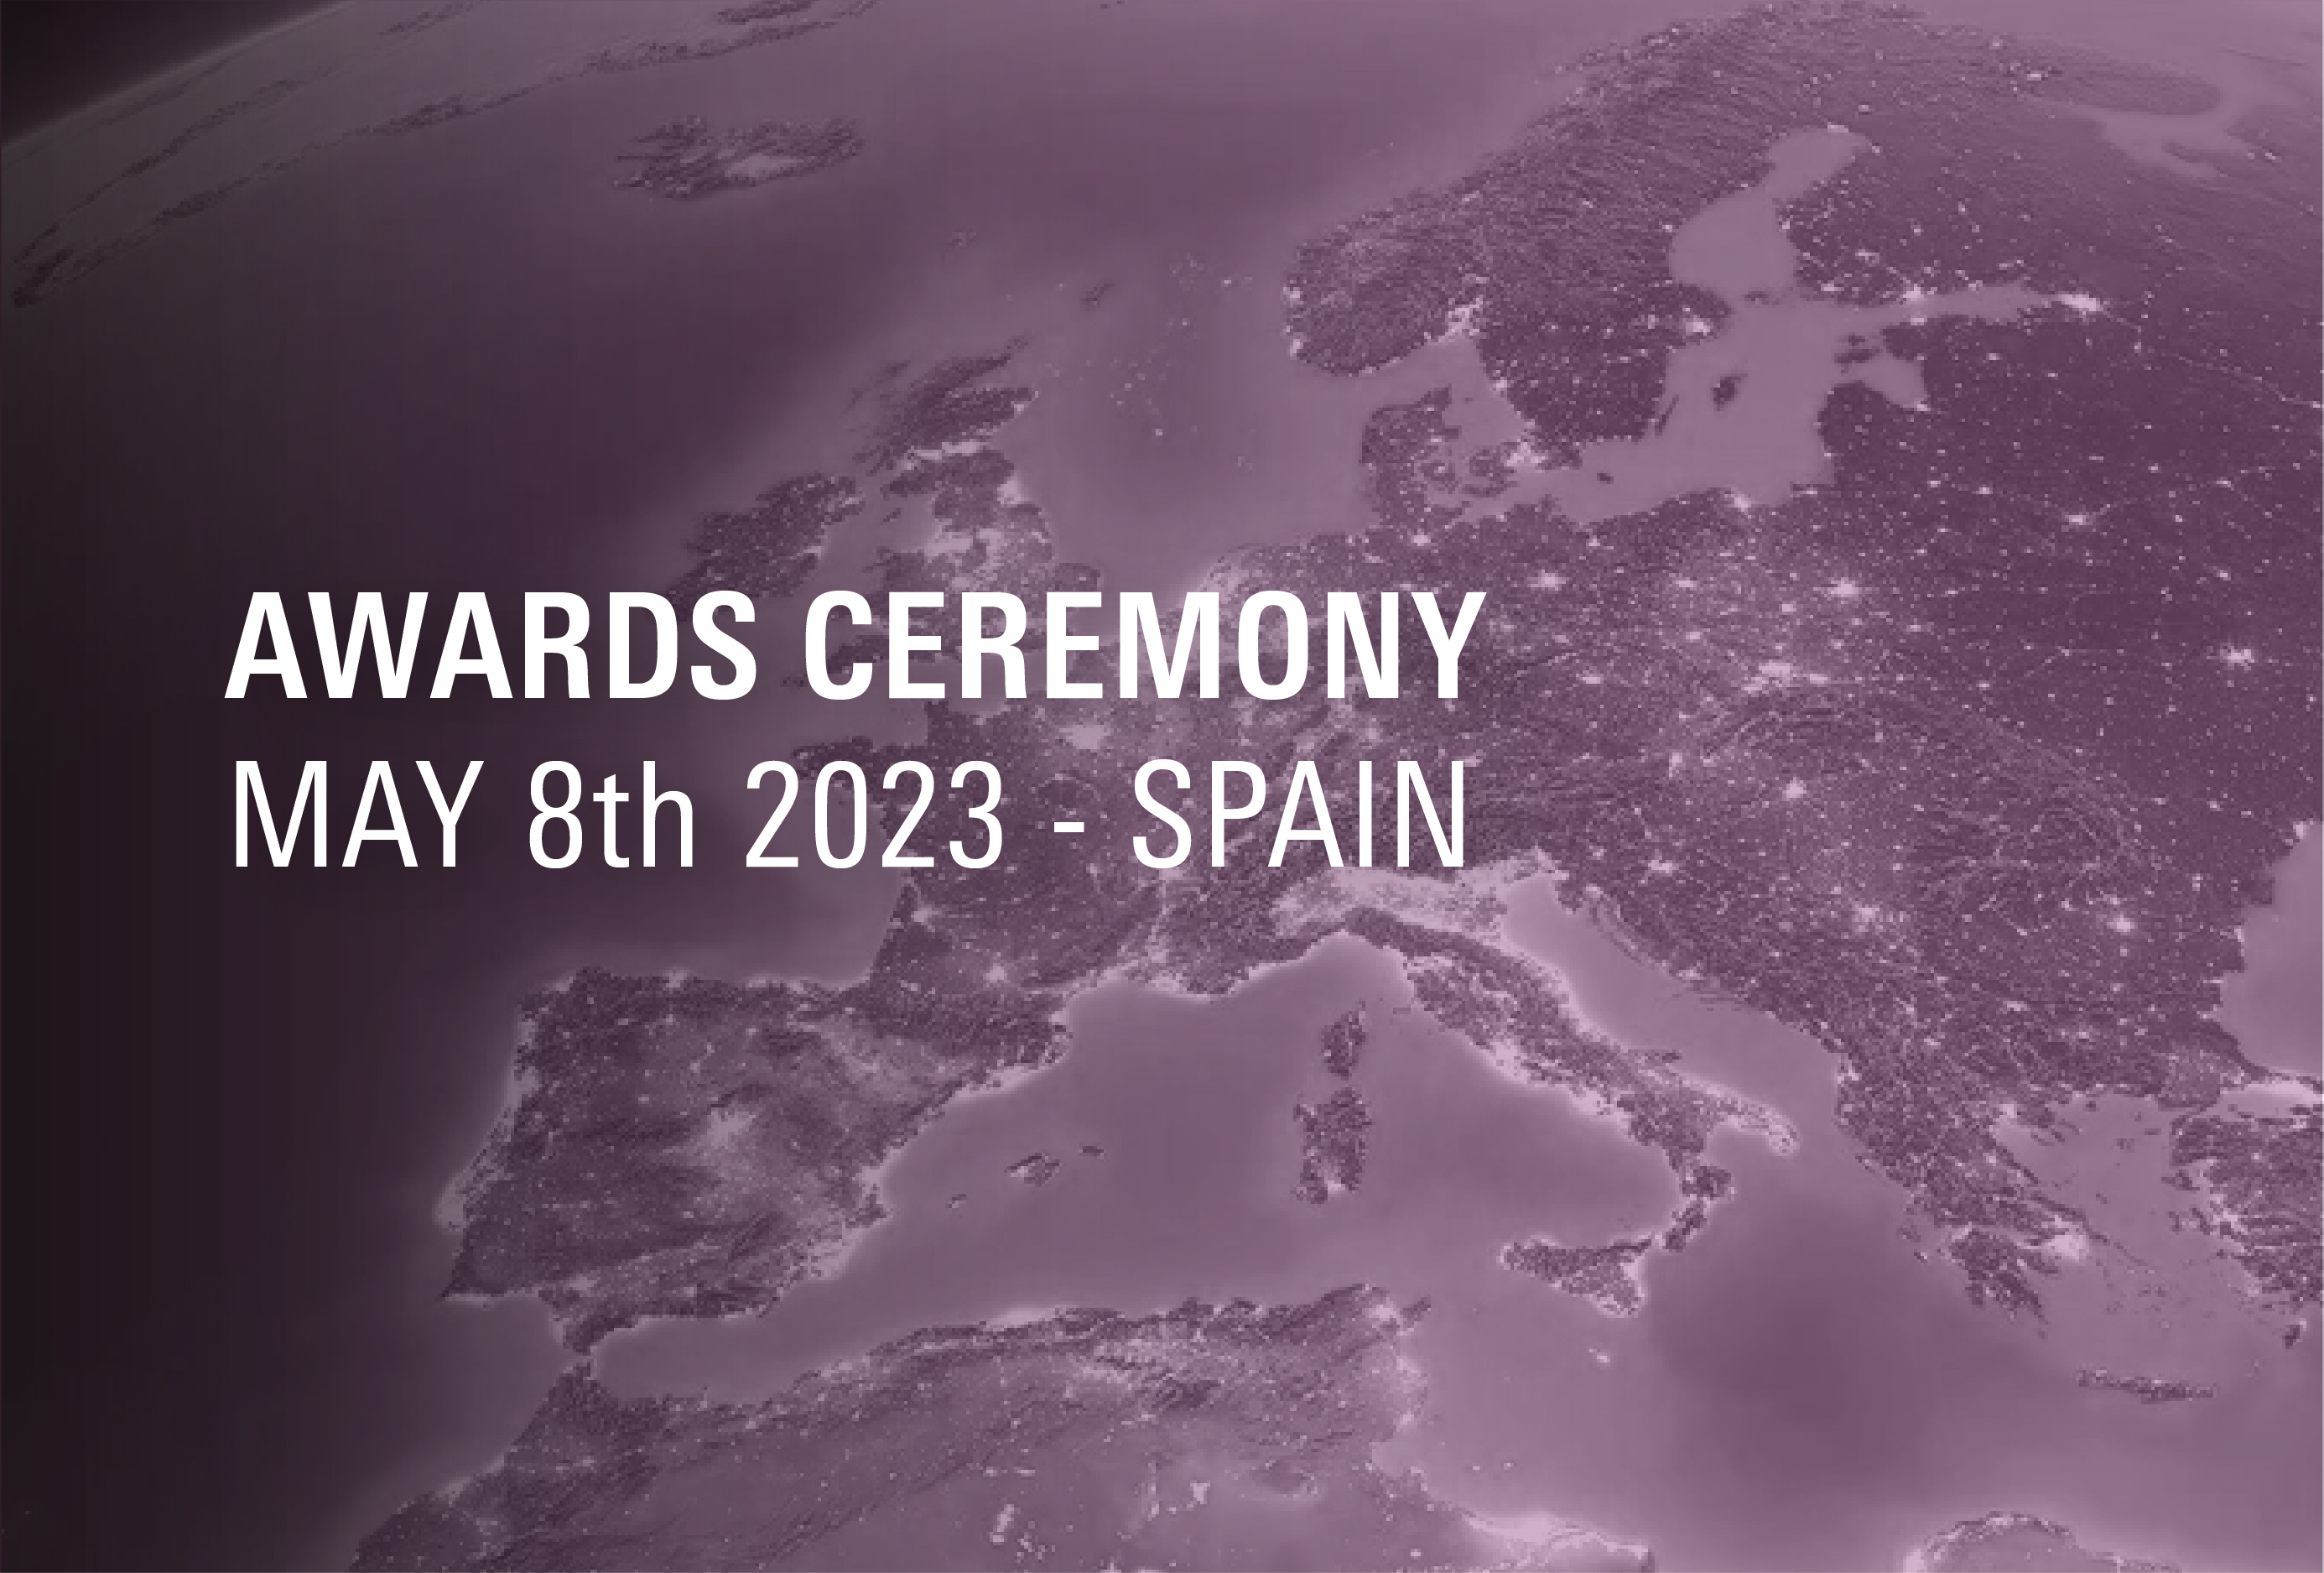 The International Hairdressing Awards ceremony will be held on May 8th in Spain